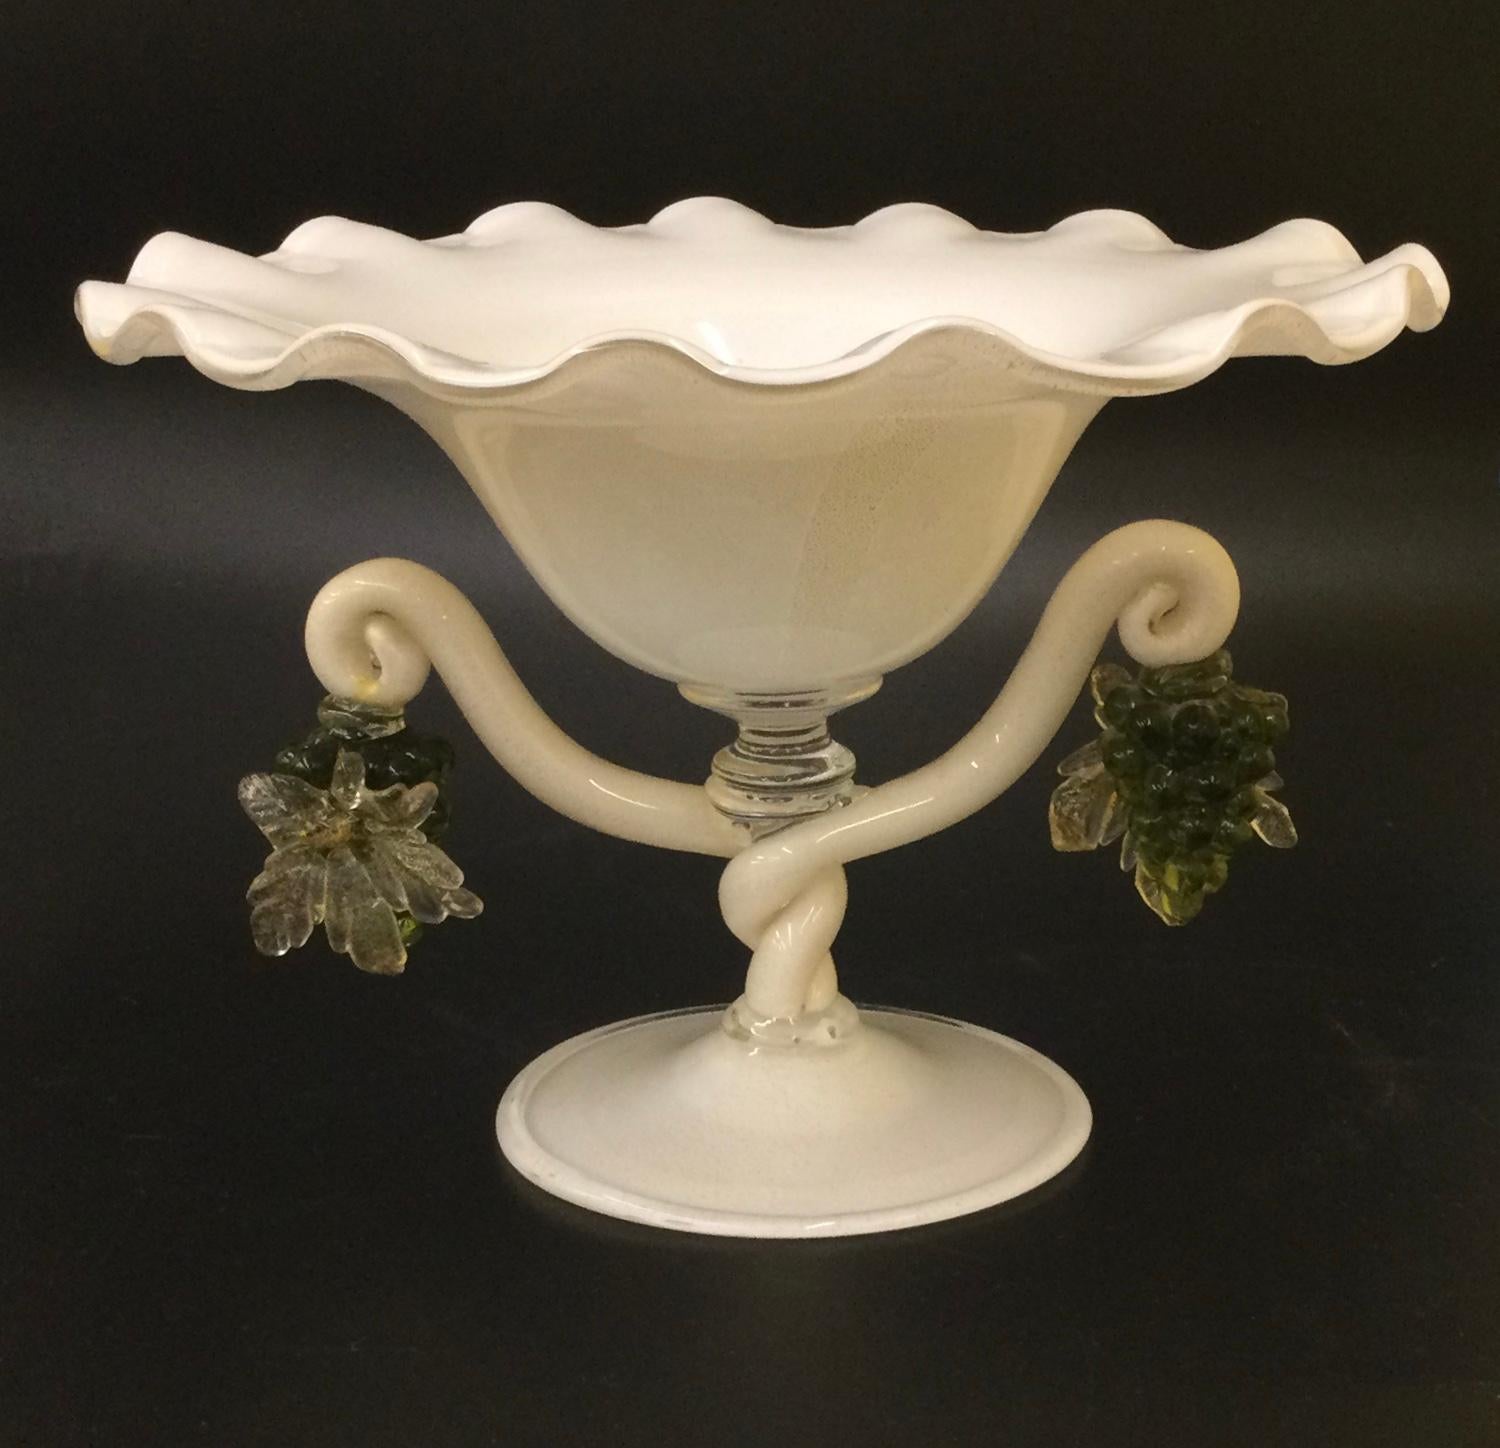 Alfredo Barbini Murano 3 piece Venetian glass console set. Console bowl is 7 3/4 inches tall by 11 1/2 inches wide. Candles are 11.5 inches tall by 5 inches wide. Amazing grape decorations on all pieces enhance this set.